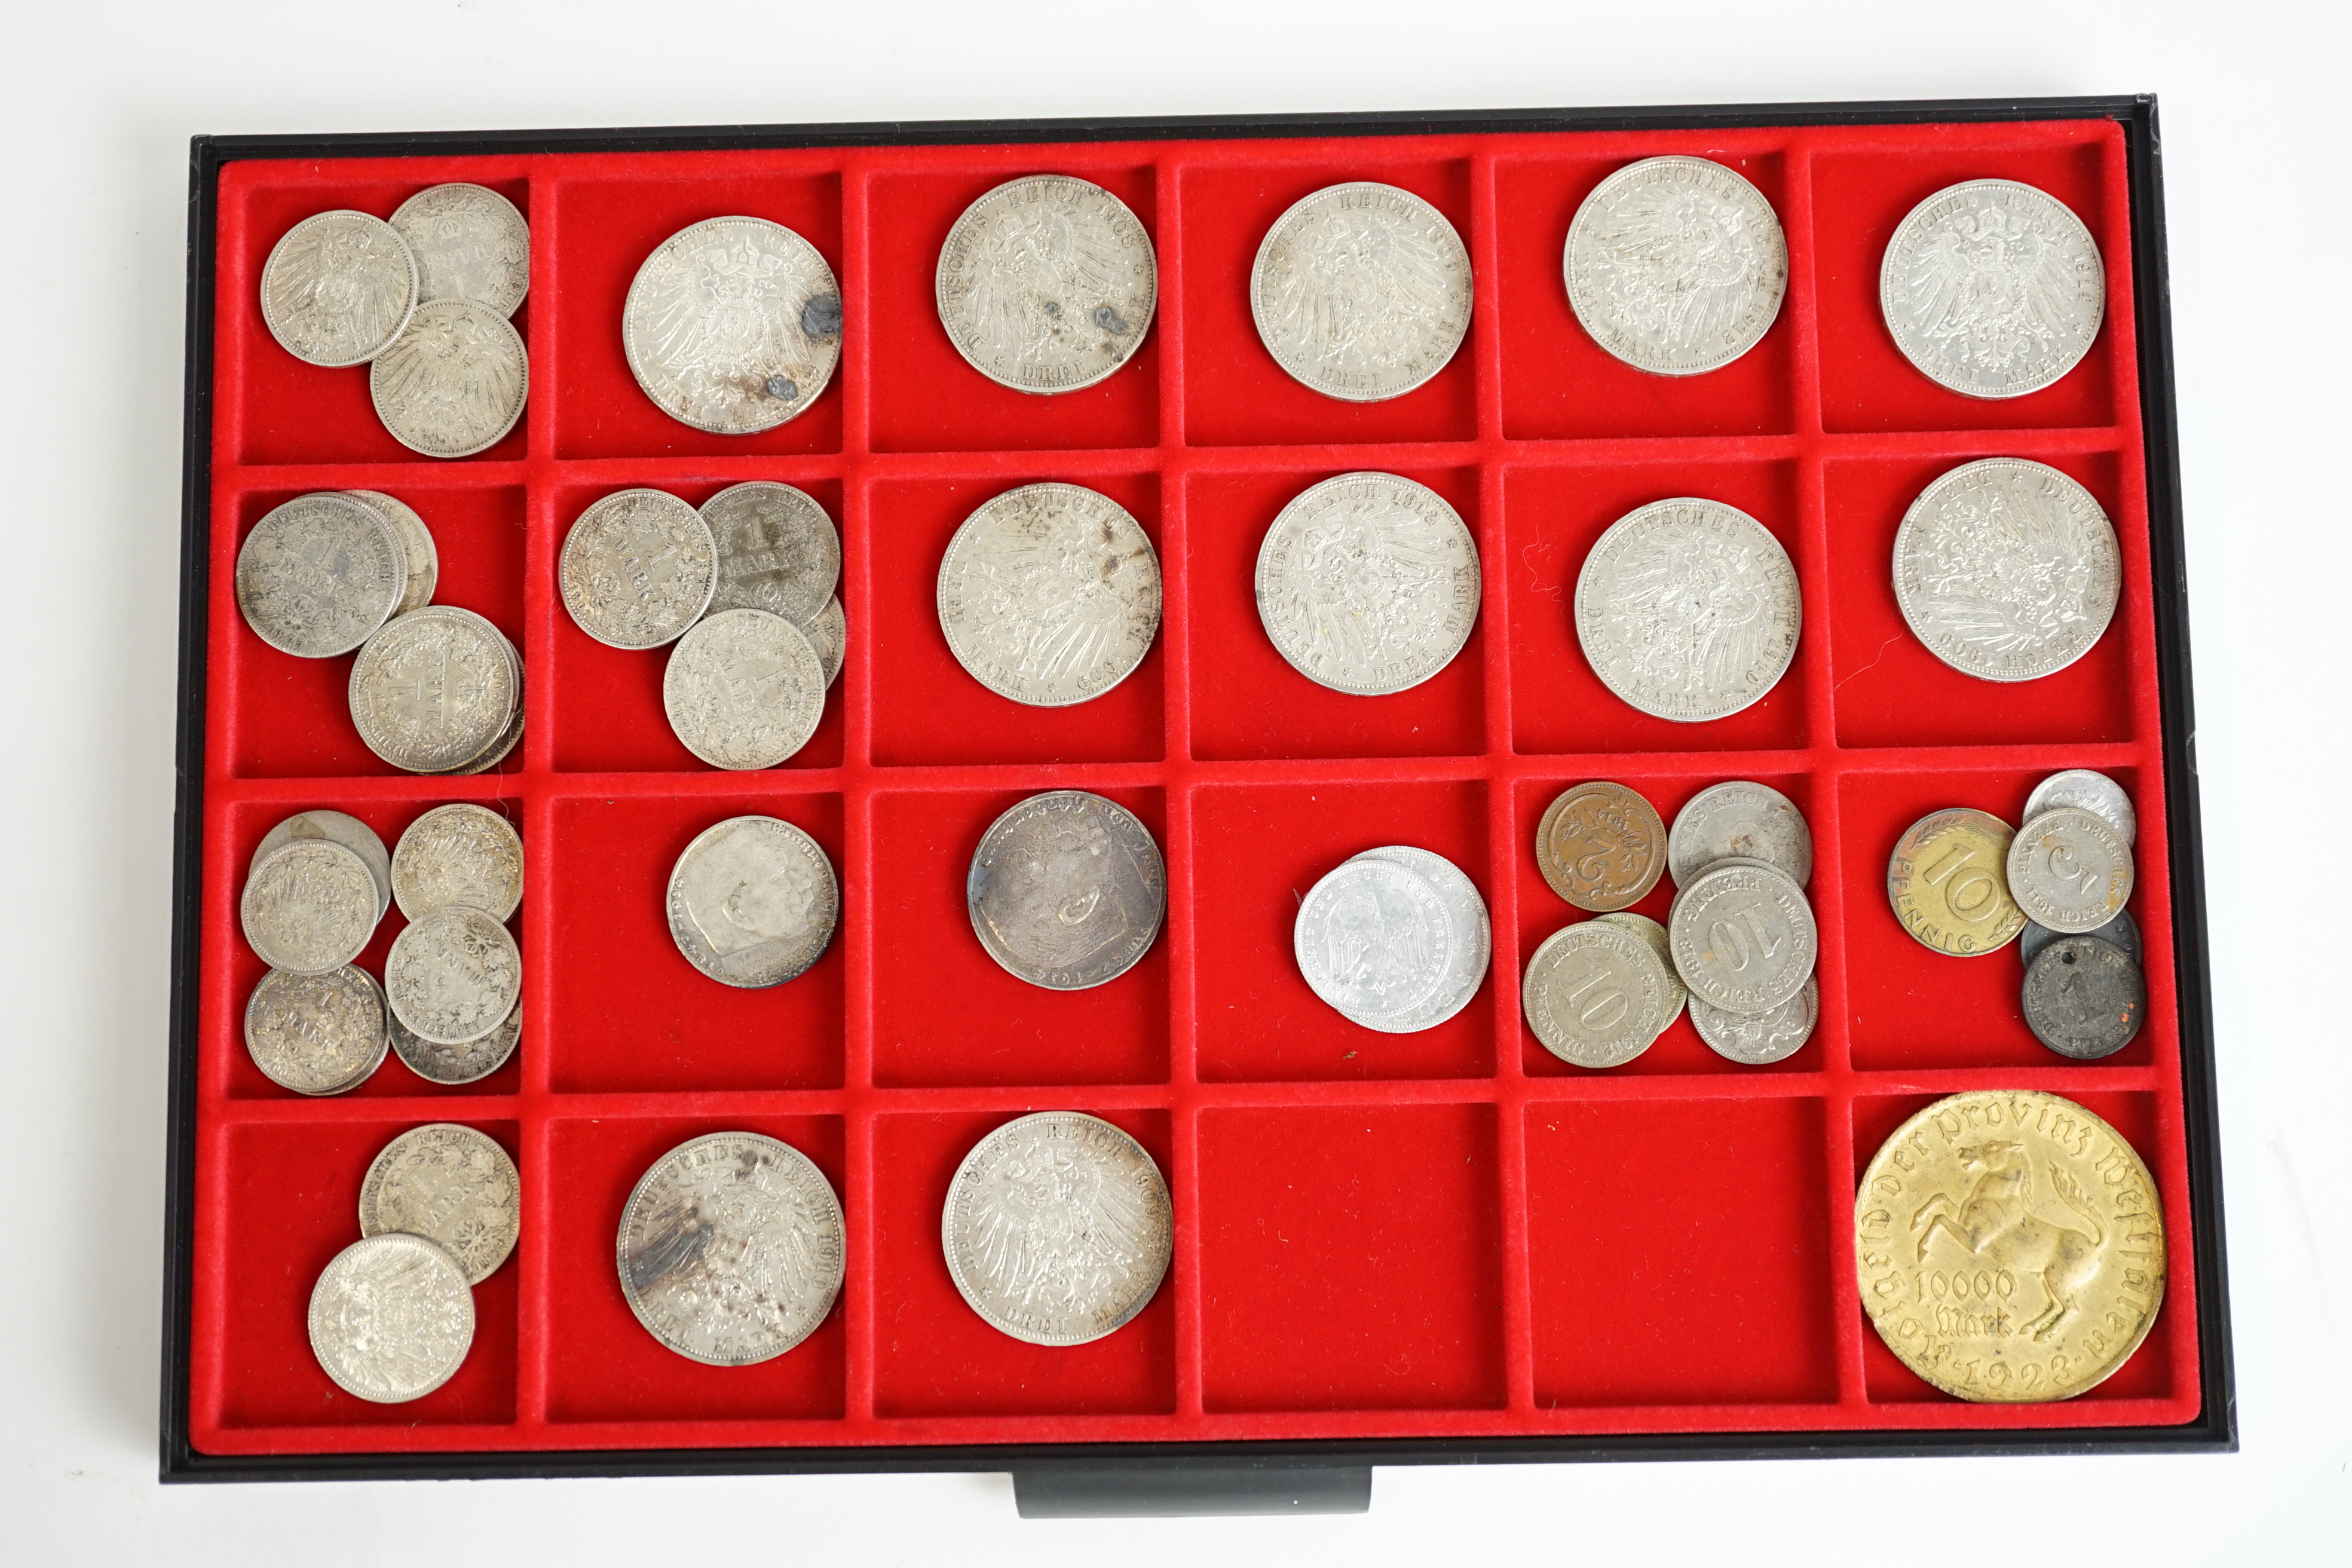 German states, silver coins, including Kingdom of Prussia, 3 mark coins, 1908A, VF, two 1909A, VF, 1910A, VF, Kingdom of Württemberg 3 mark coins, two 1912F, VF, 1914F, good VF, Grand Duchy of Baden, 3 mark, 1914G, VF, f